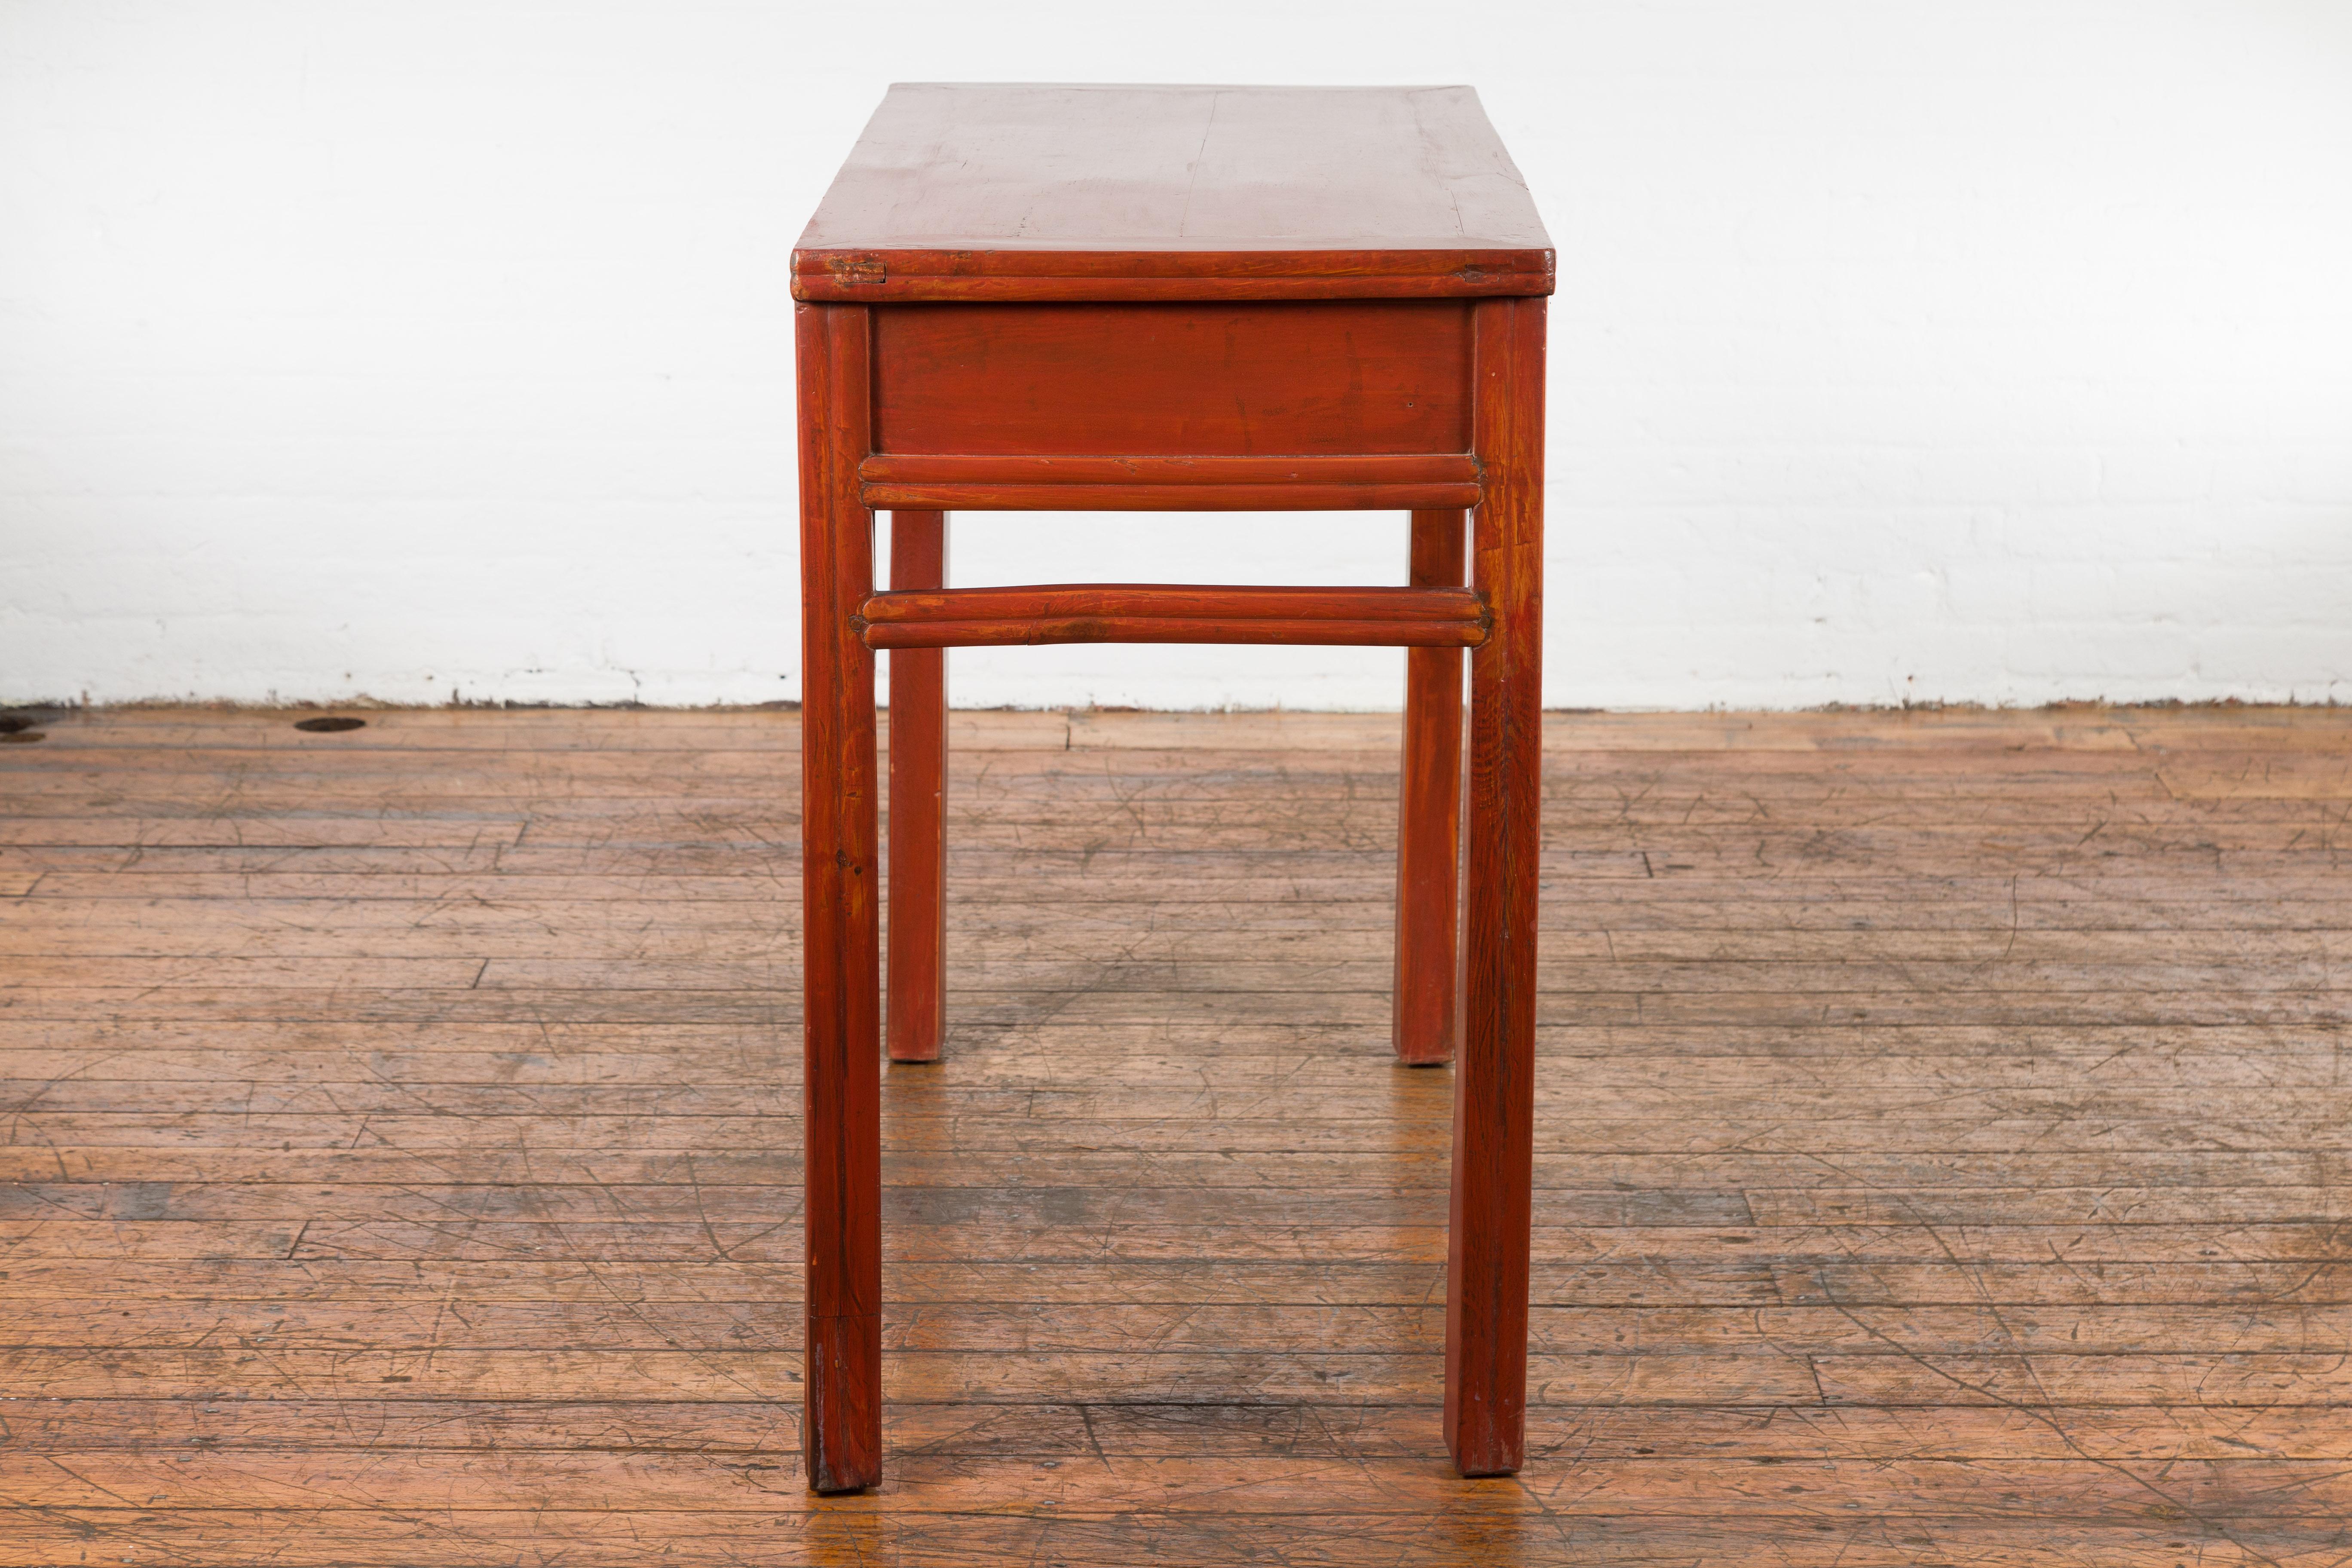 Chinese Qing Dynasty 19th Century Red Orange Lacquered Table with Three Drawers For Sale 12